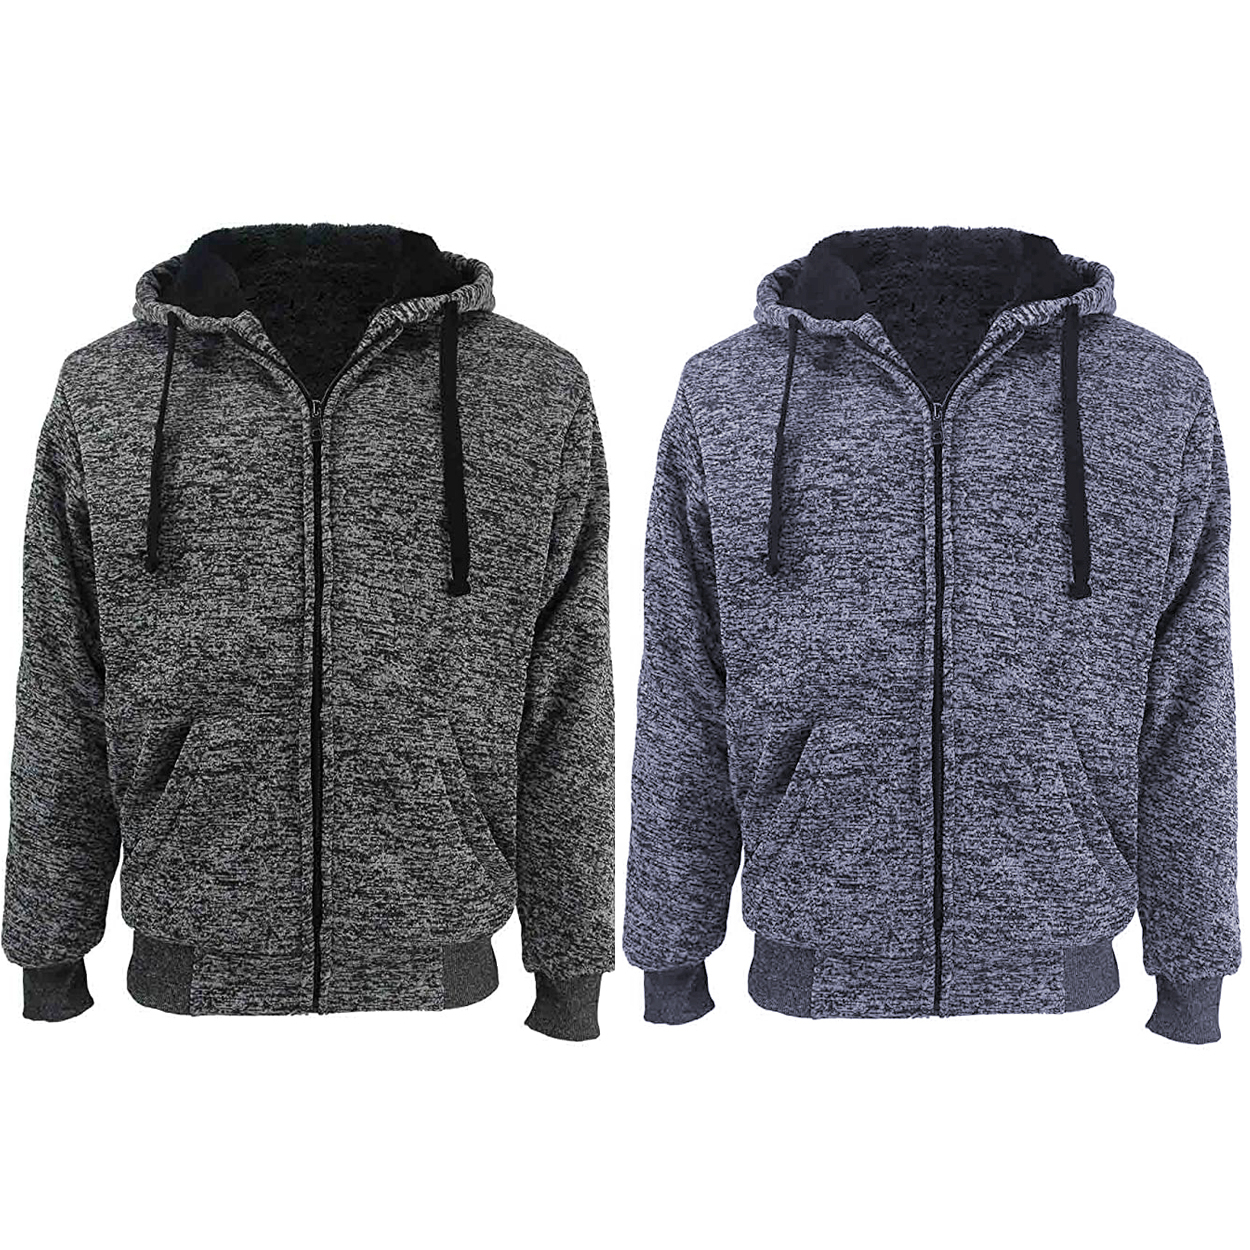 2-Pack: Men's Marled Extra-Thick Sherpa-Lined Fleece Hoodies - Large